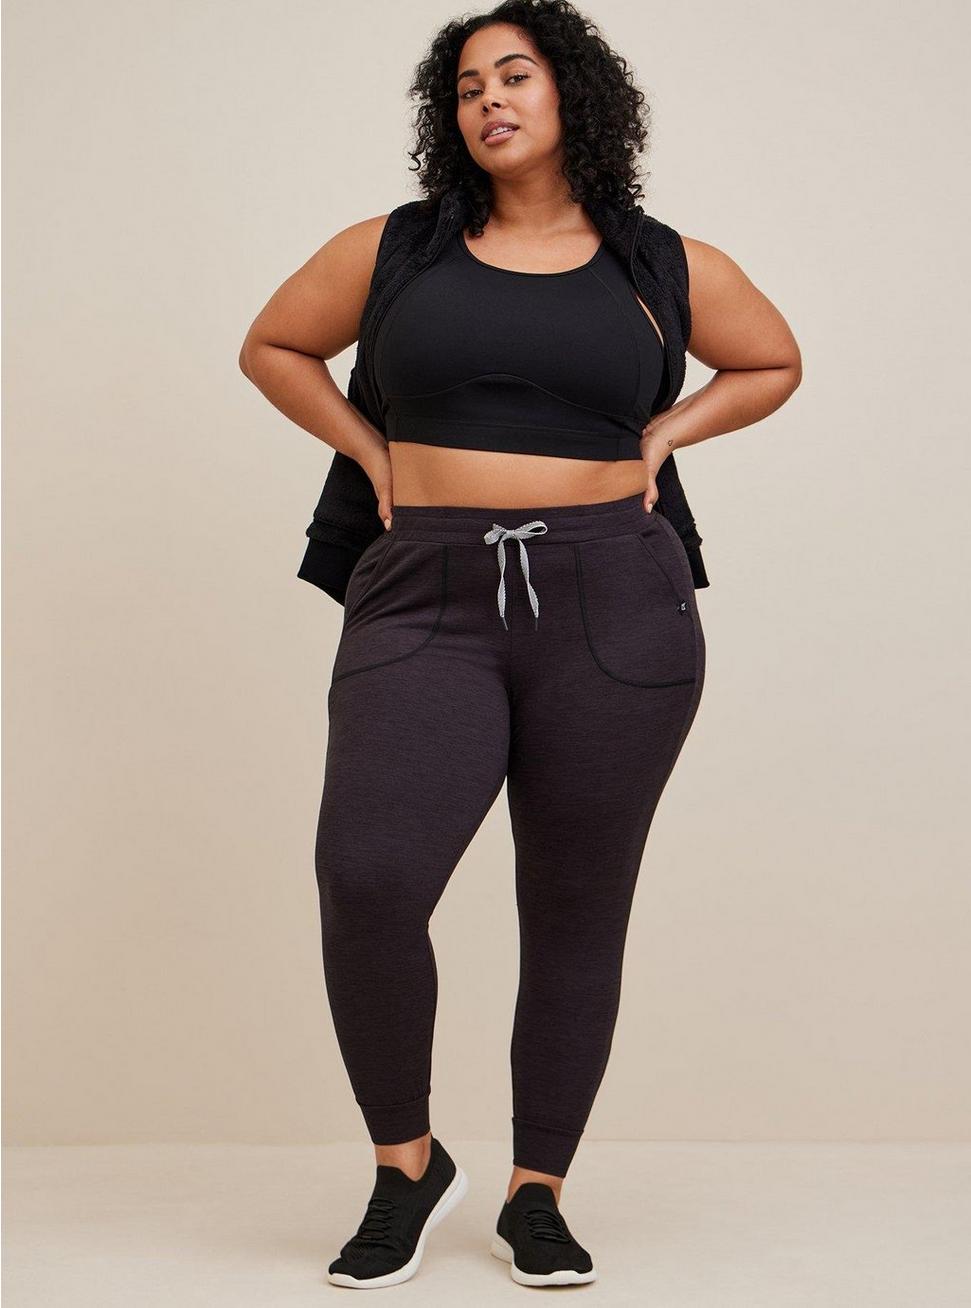 Happy Camper Super Soft Performance Jersey Crop Active Jogger In Classic Fit, DEEP BLACK, alternate